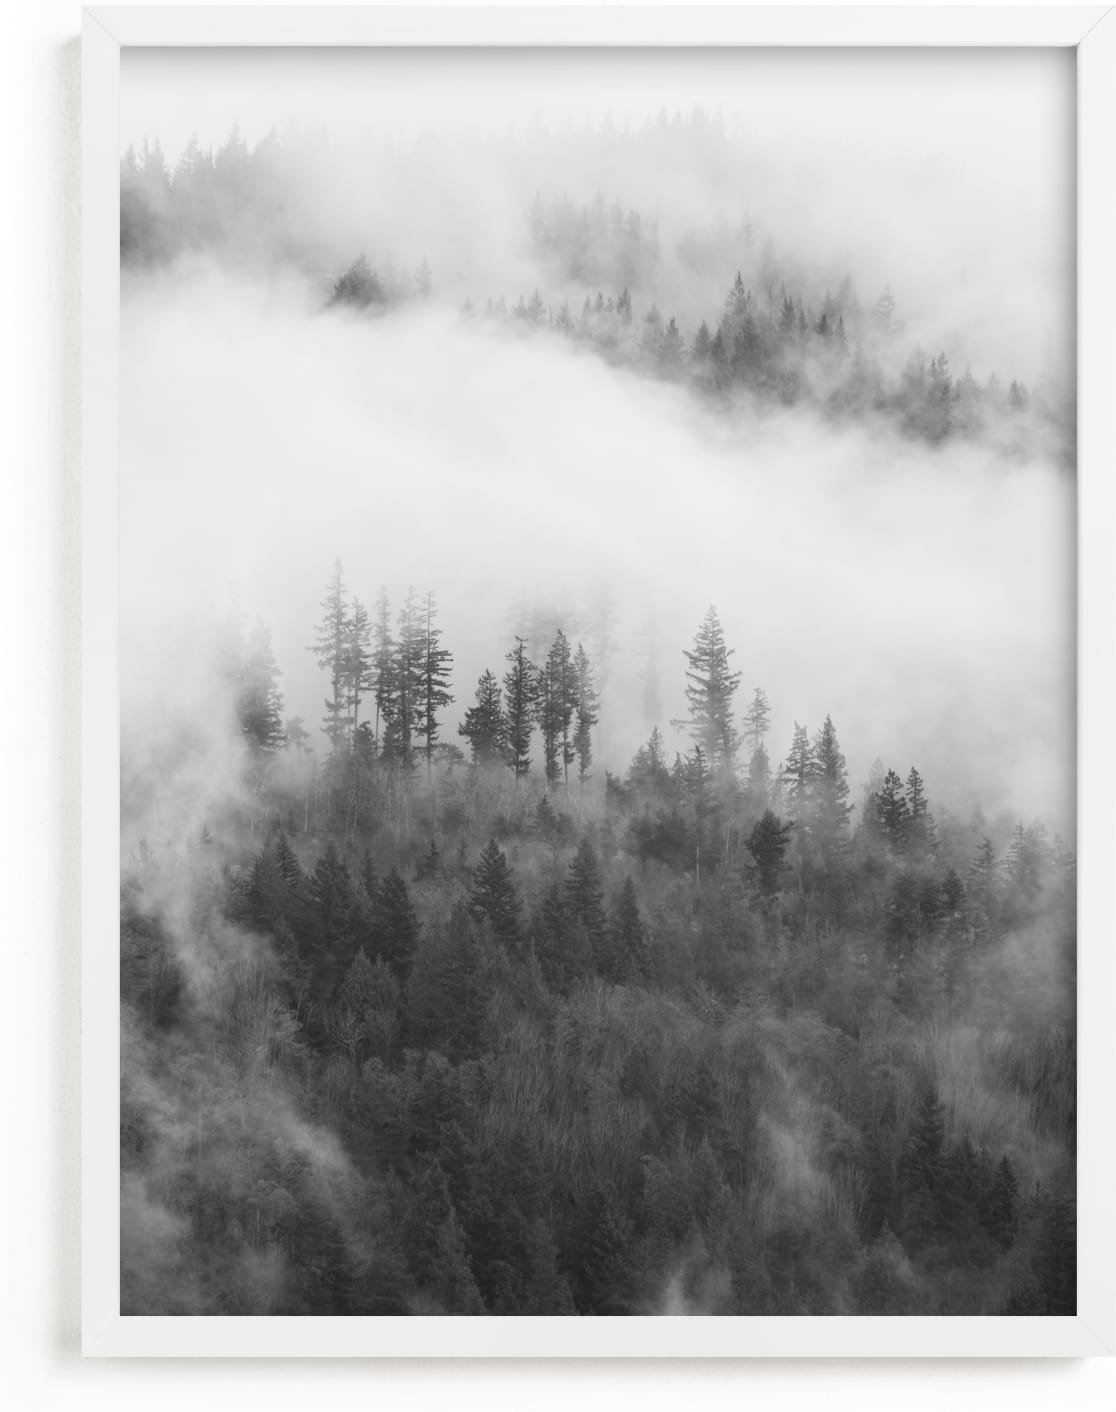 This is a black and white art by Jennifer Morrow called Hillside Fog.